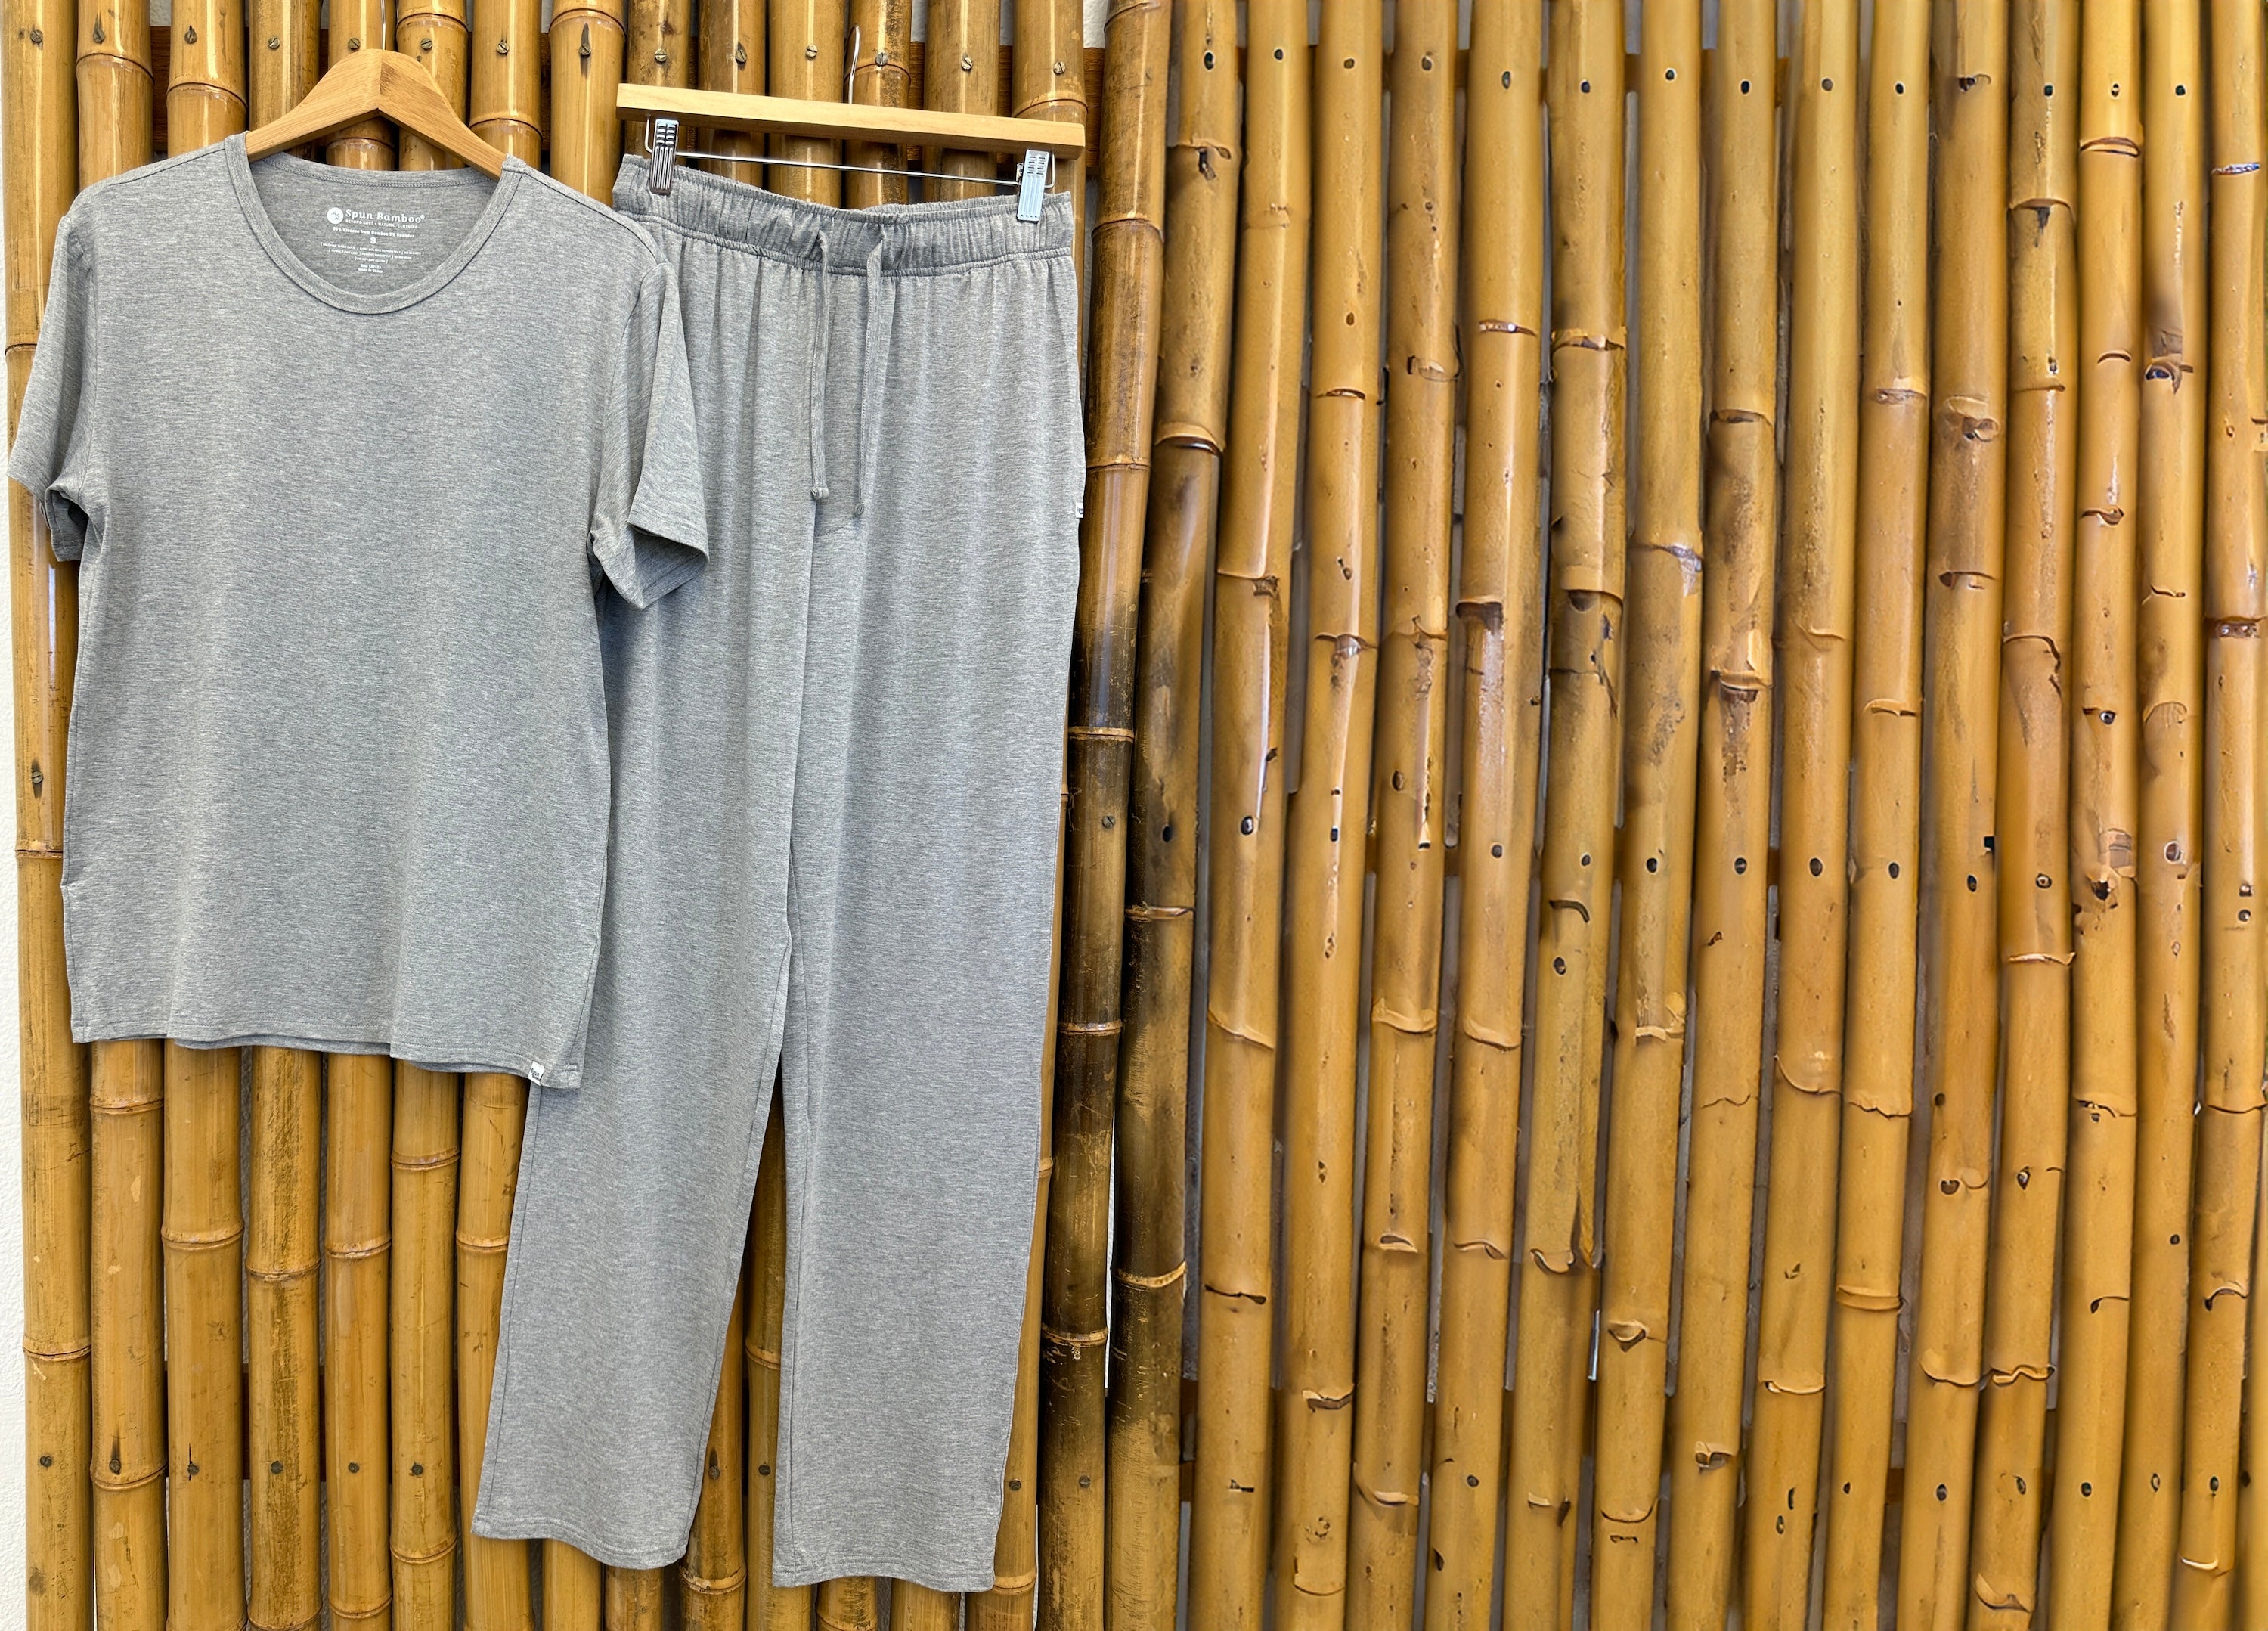 Are bamboo clothes and fabrics sustainable? | Popular Science